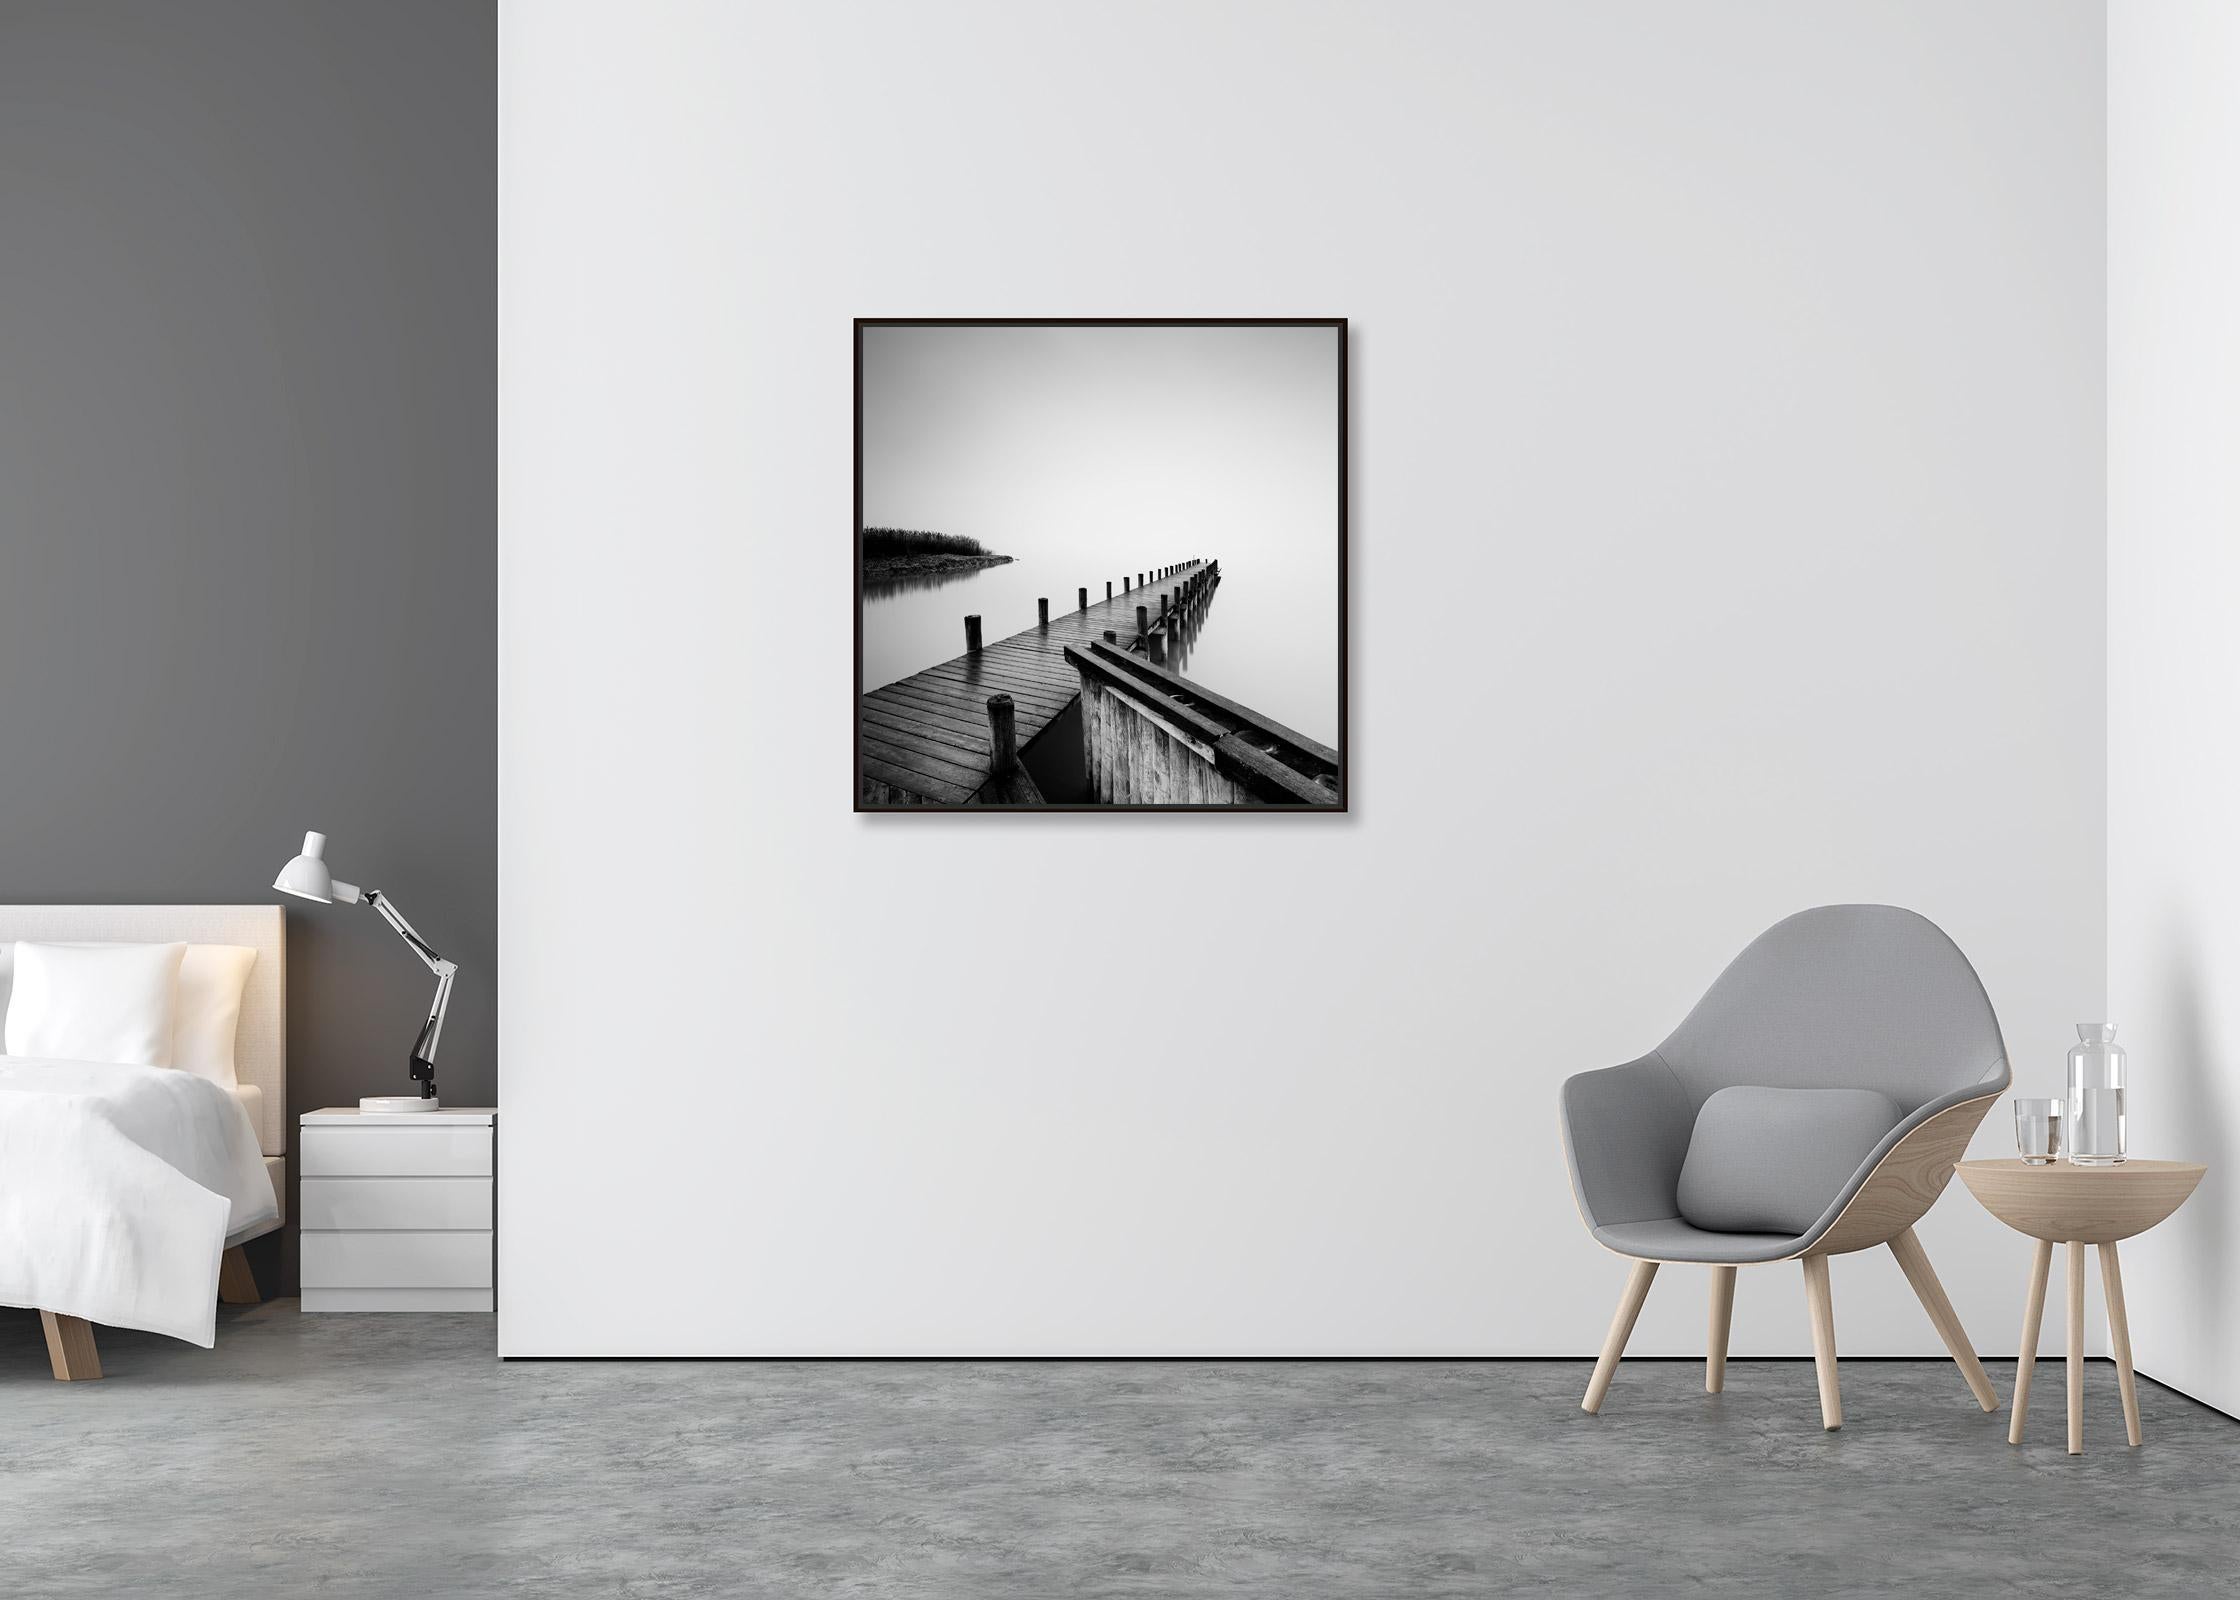 Jetty on calm Lake, silent misty morning, black and white, fine art waterscape - Contemporary Photograph by Gerald Berghammer